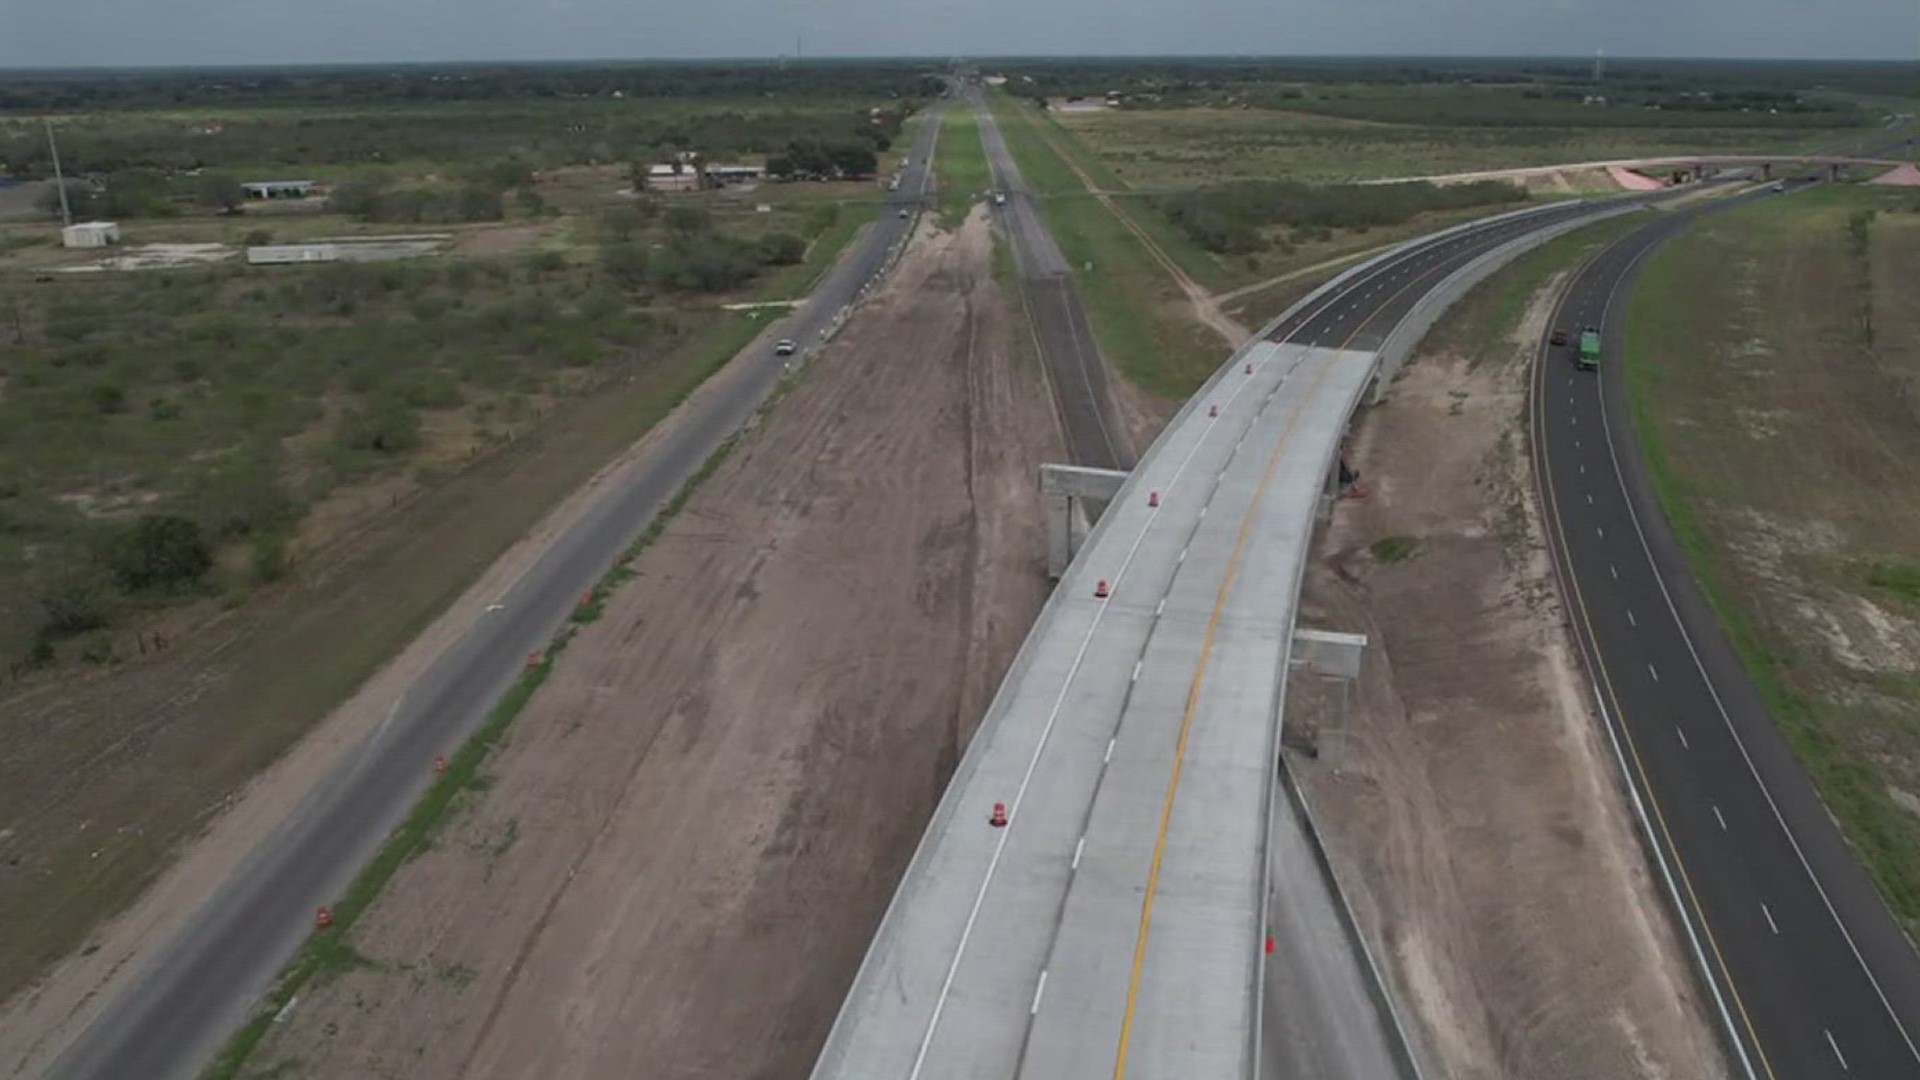 Two lanes of the TxDOT project opened Wednesday.